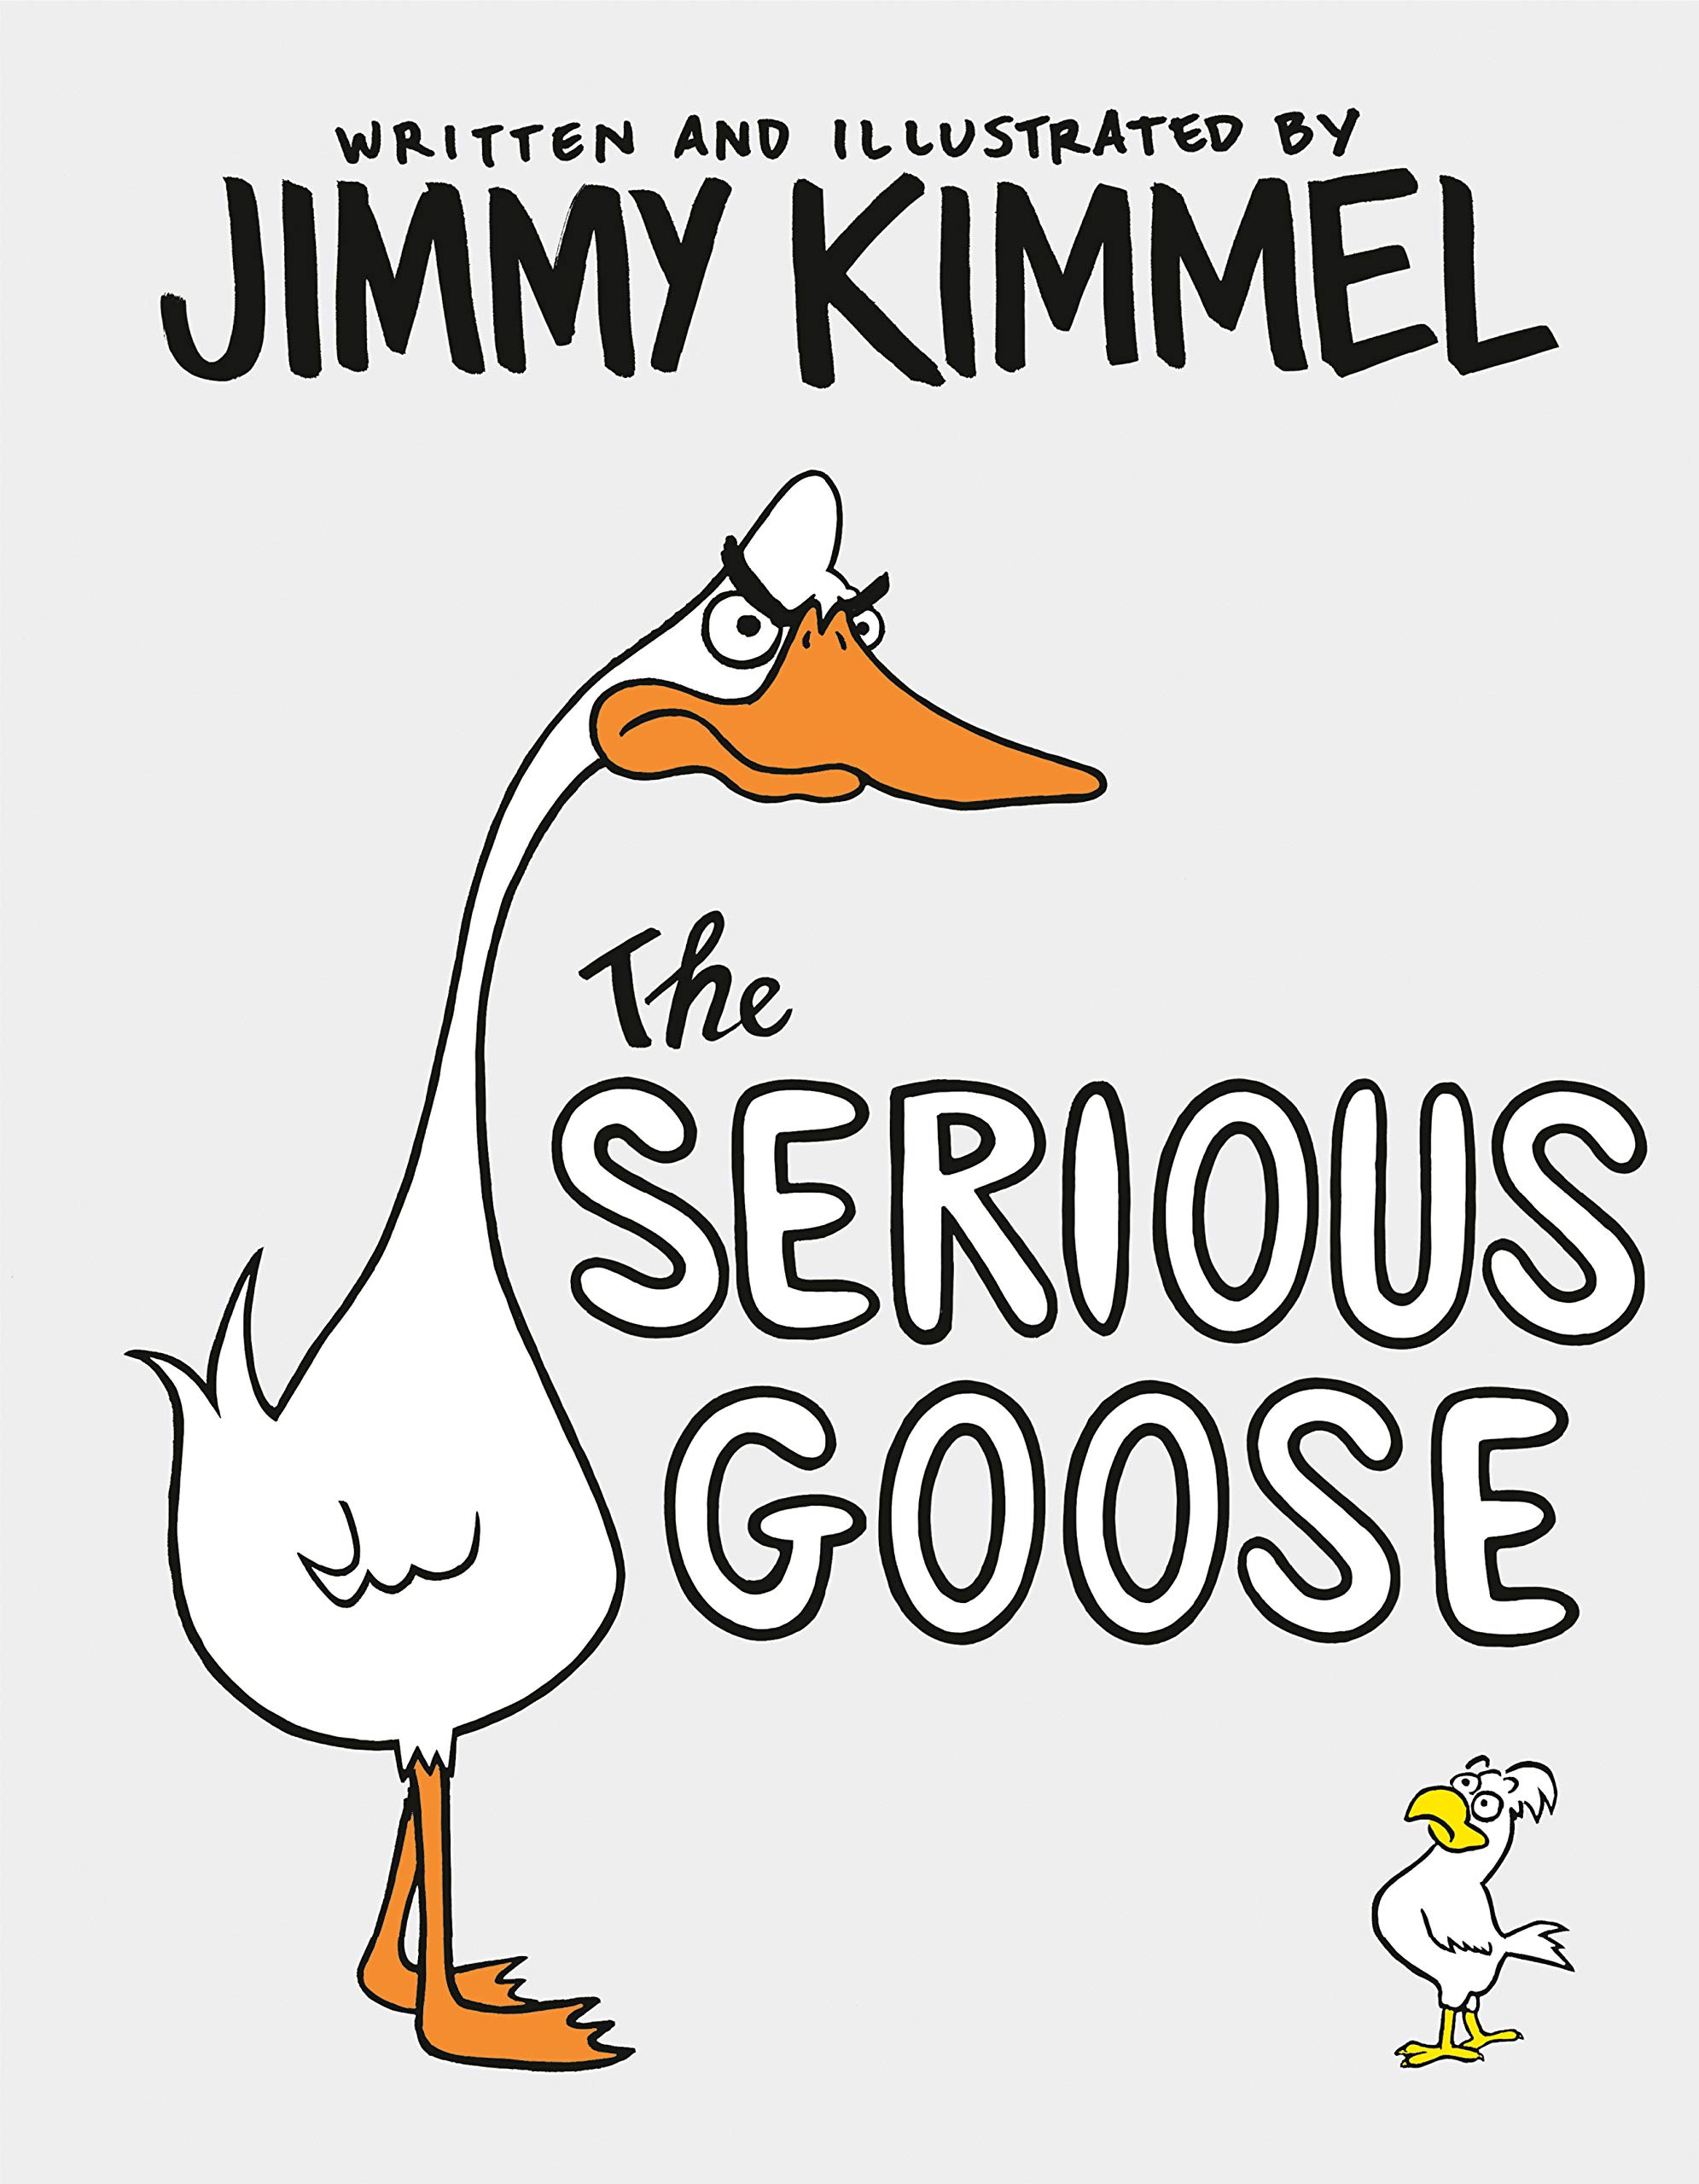 Image for "The Serious Goose"